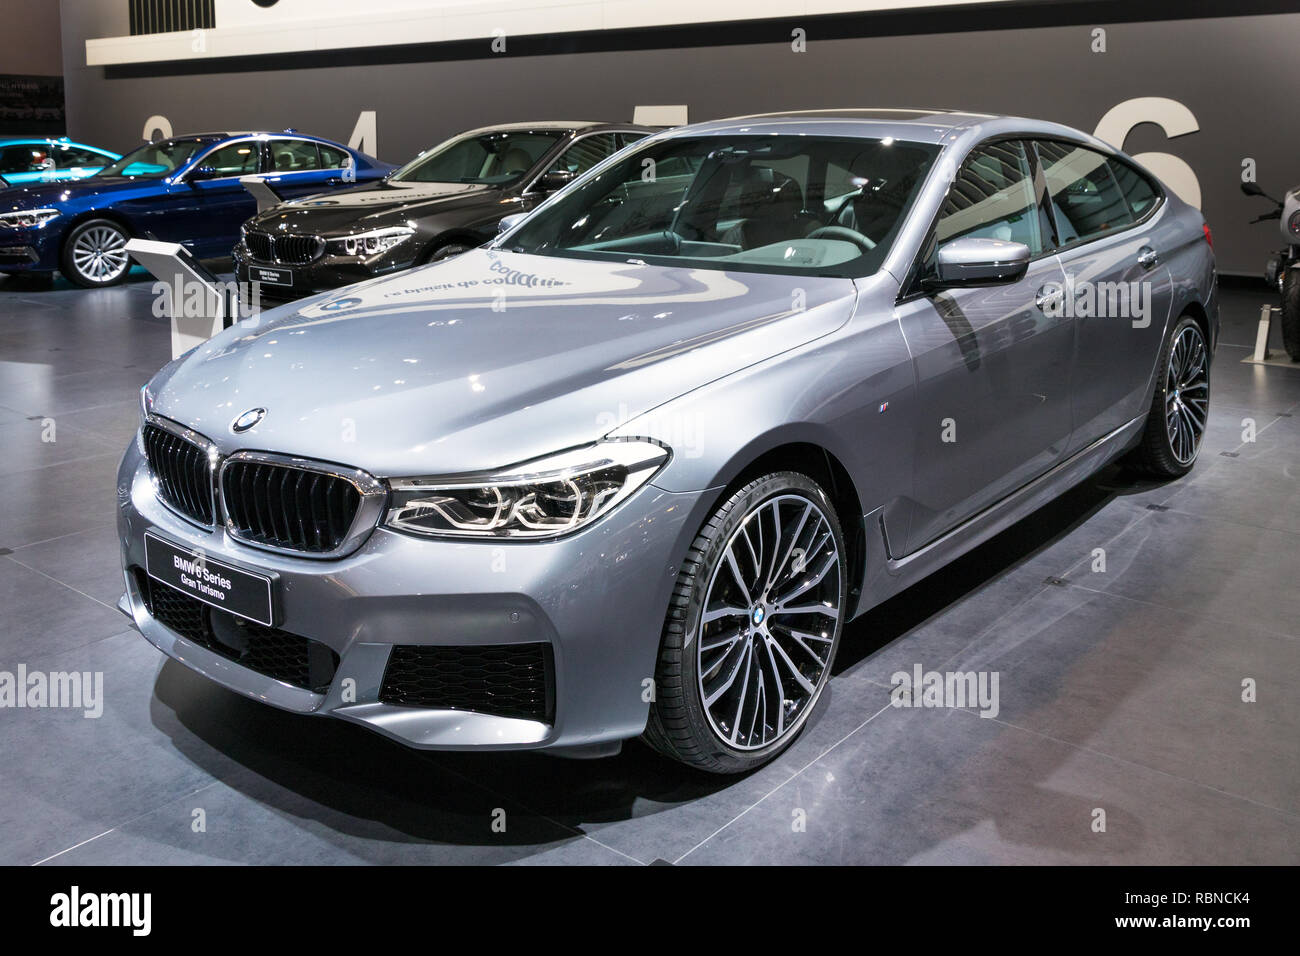 BRUSSELS - JAN 10, 2018: BMW 6 Series Gran Turismo luxury car showcased at the Brussels Expo Autosalon motor show. Stock Photo